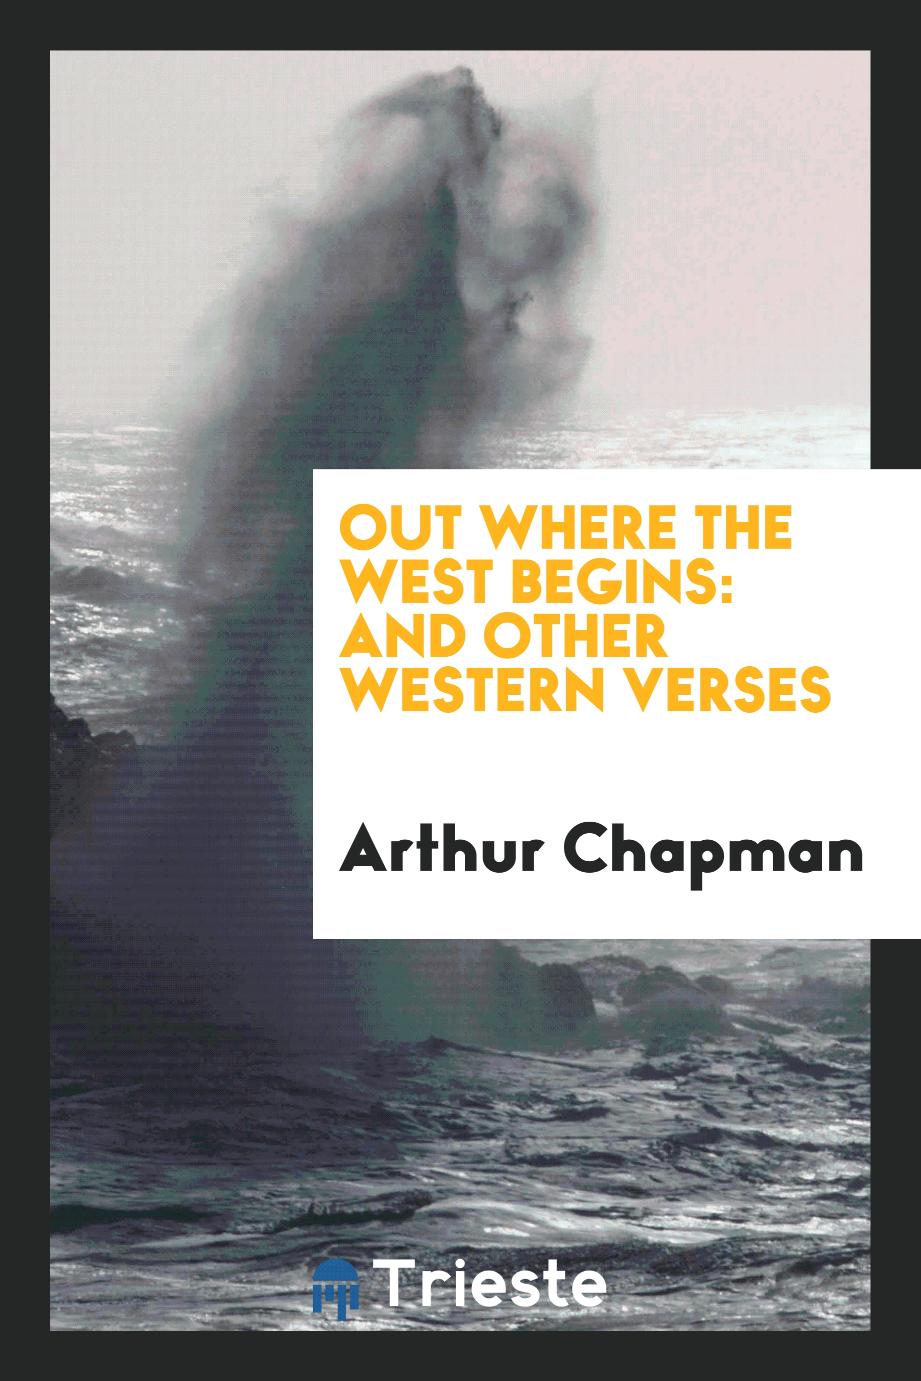 Arthur Chapman - Out where the West begins: and other western verses